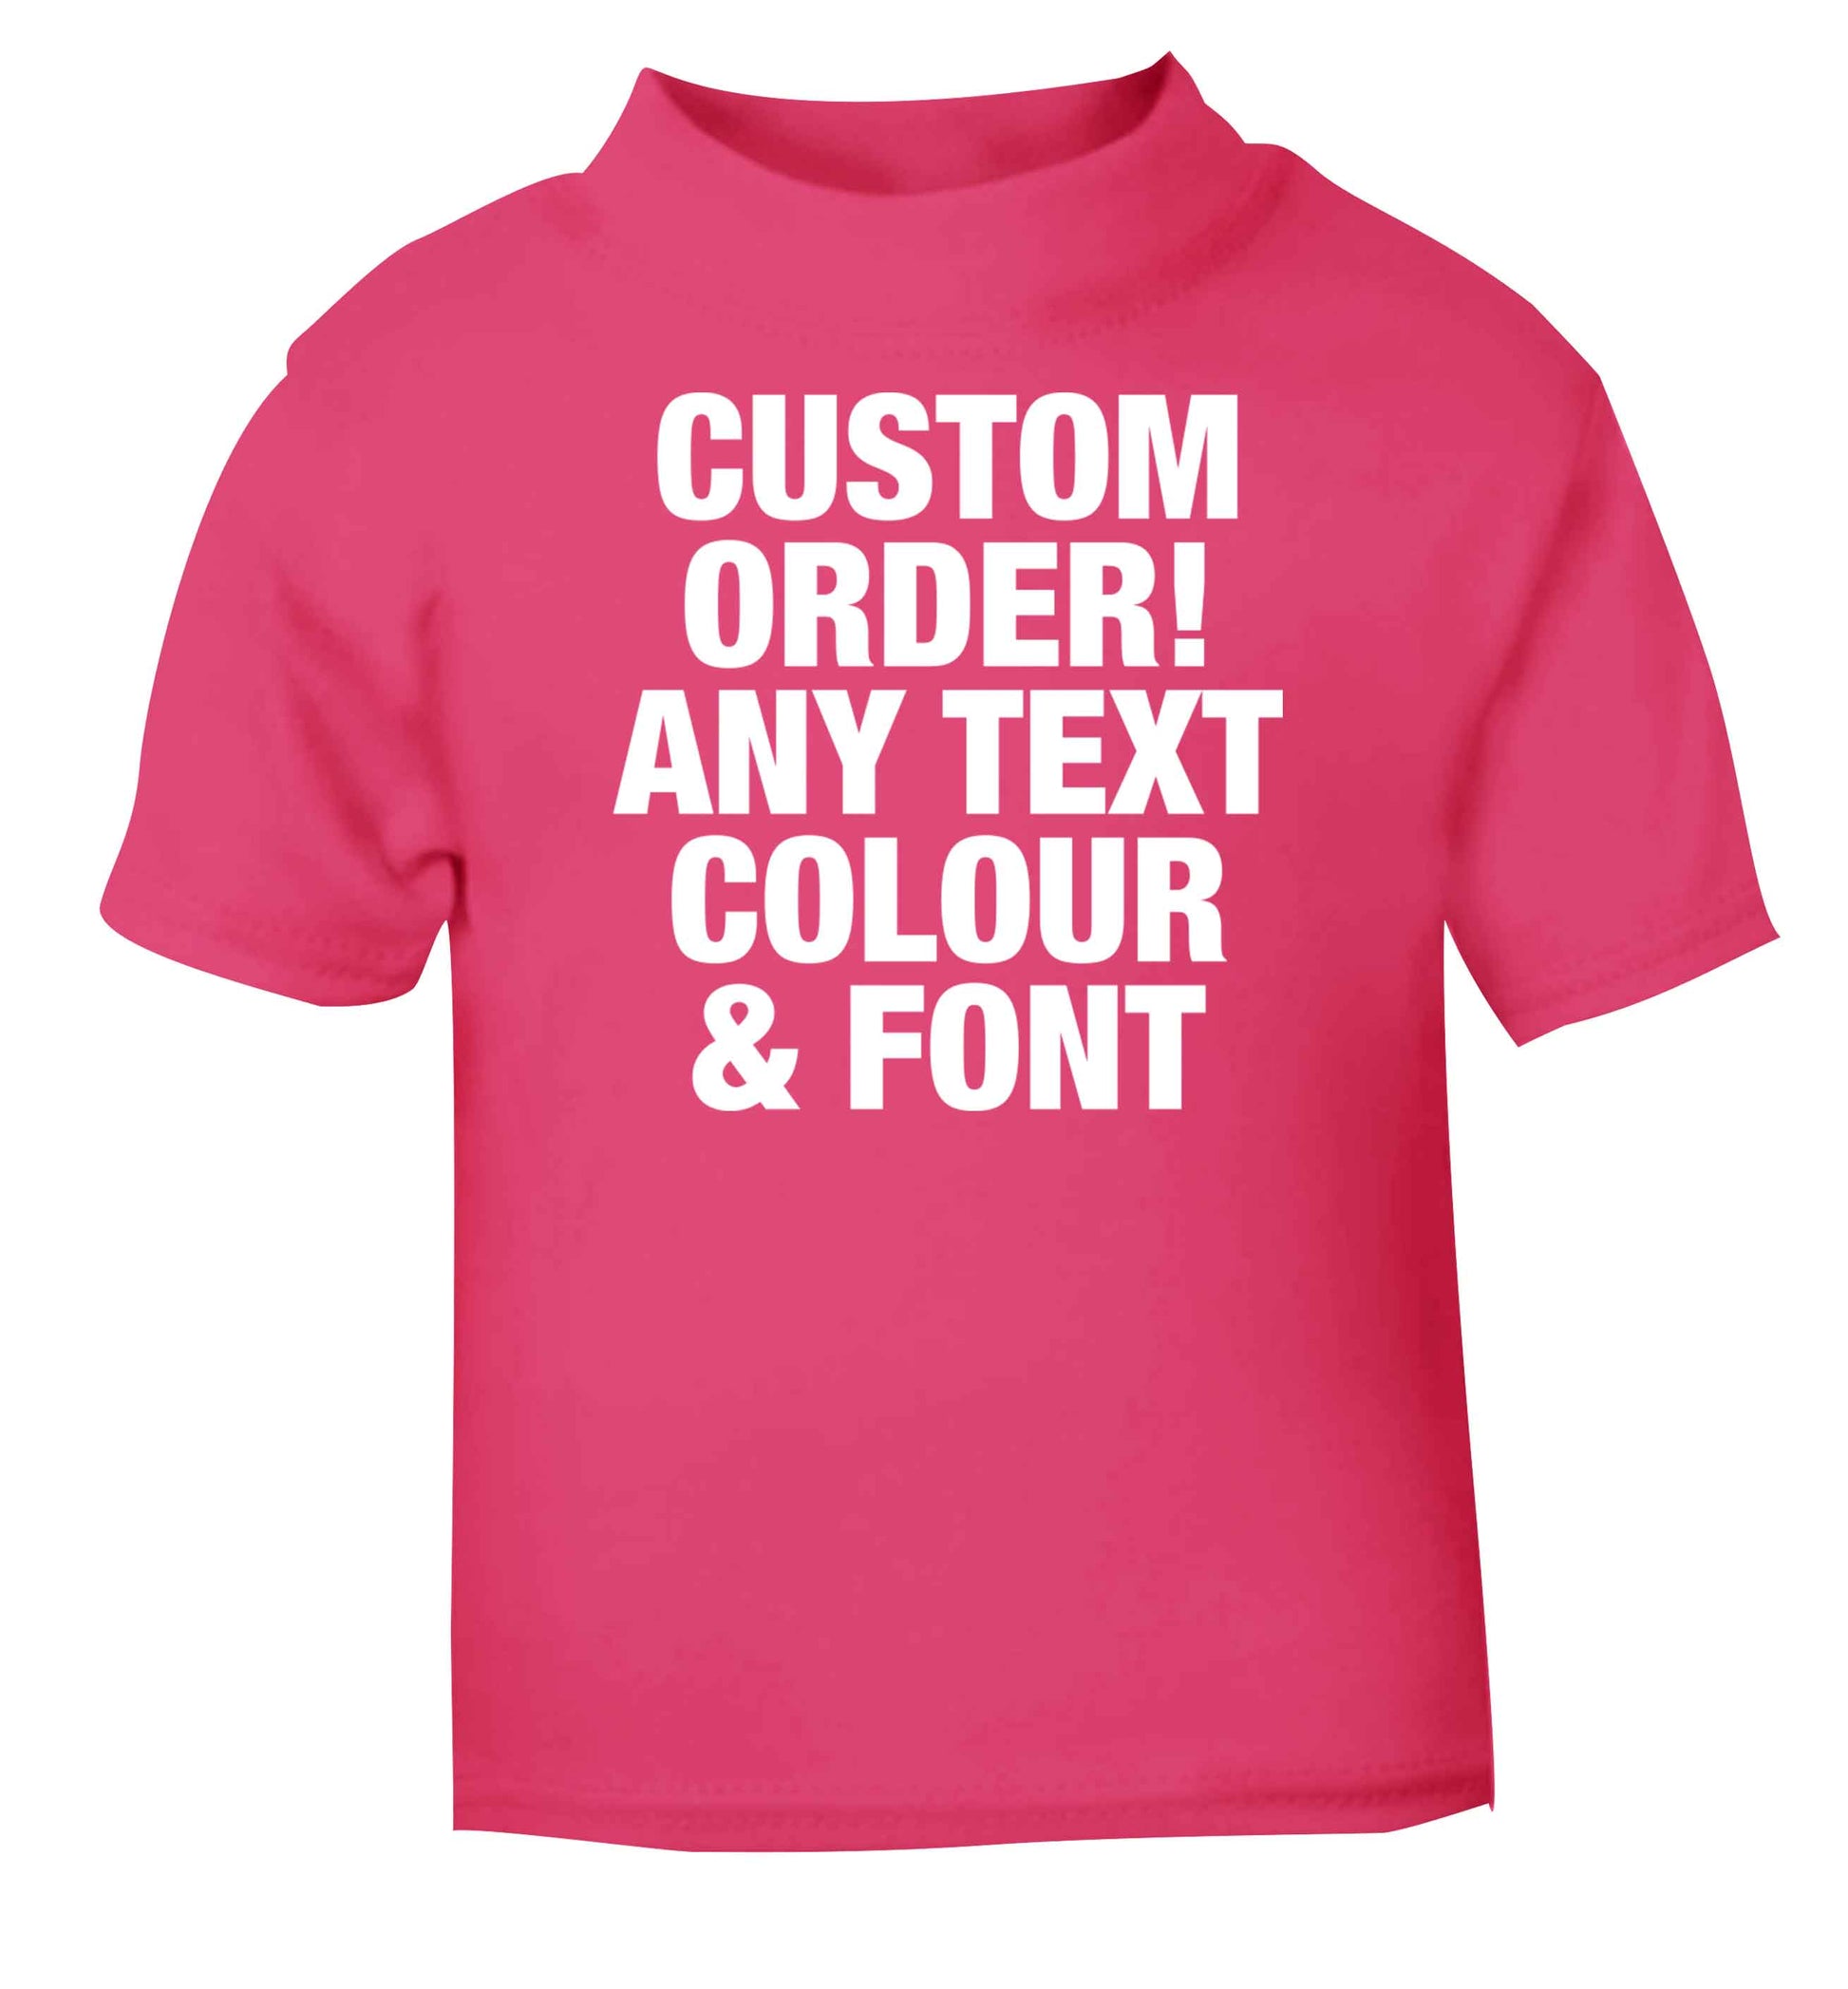 Custom order any text colour and font pink baby toddler Tshirt 2 Years